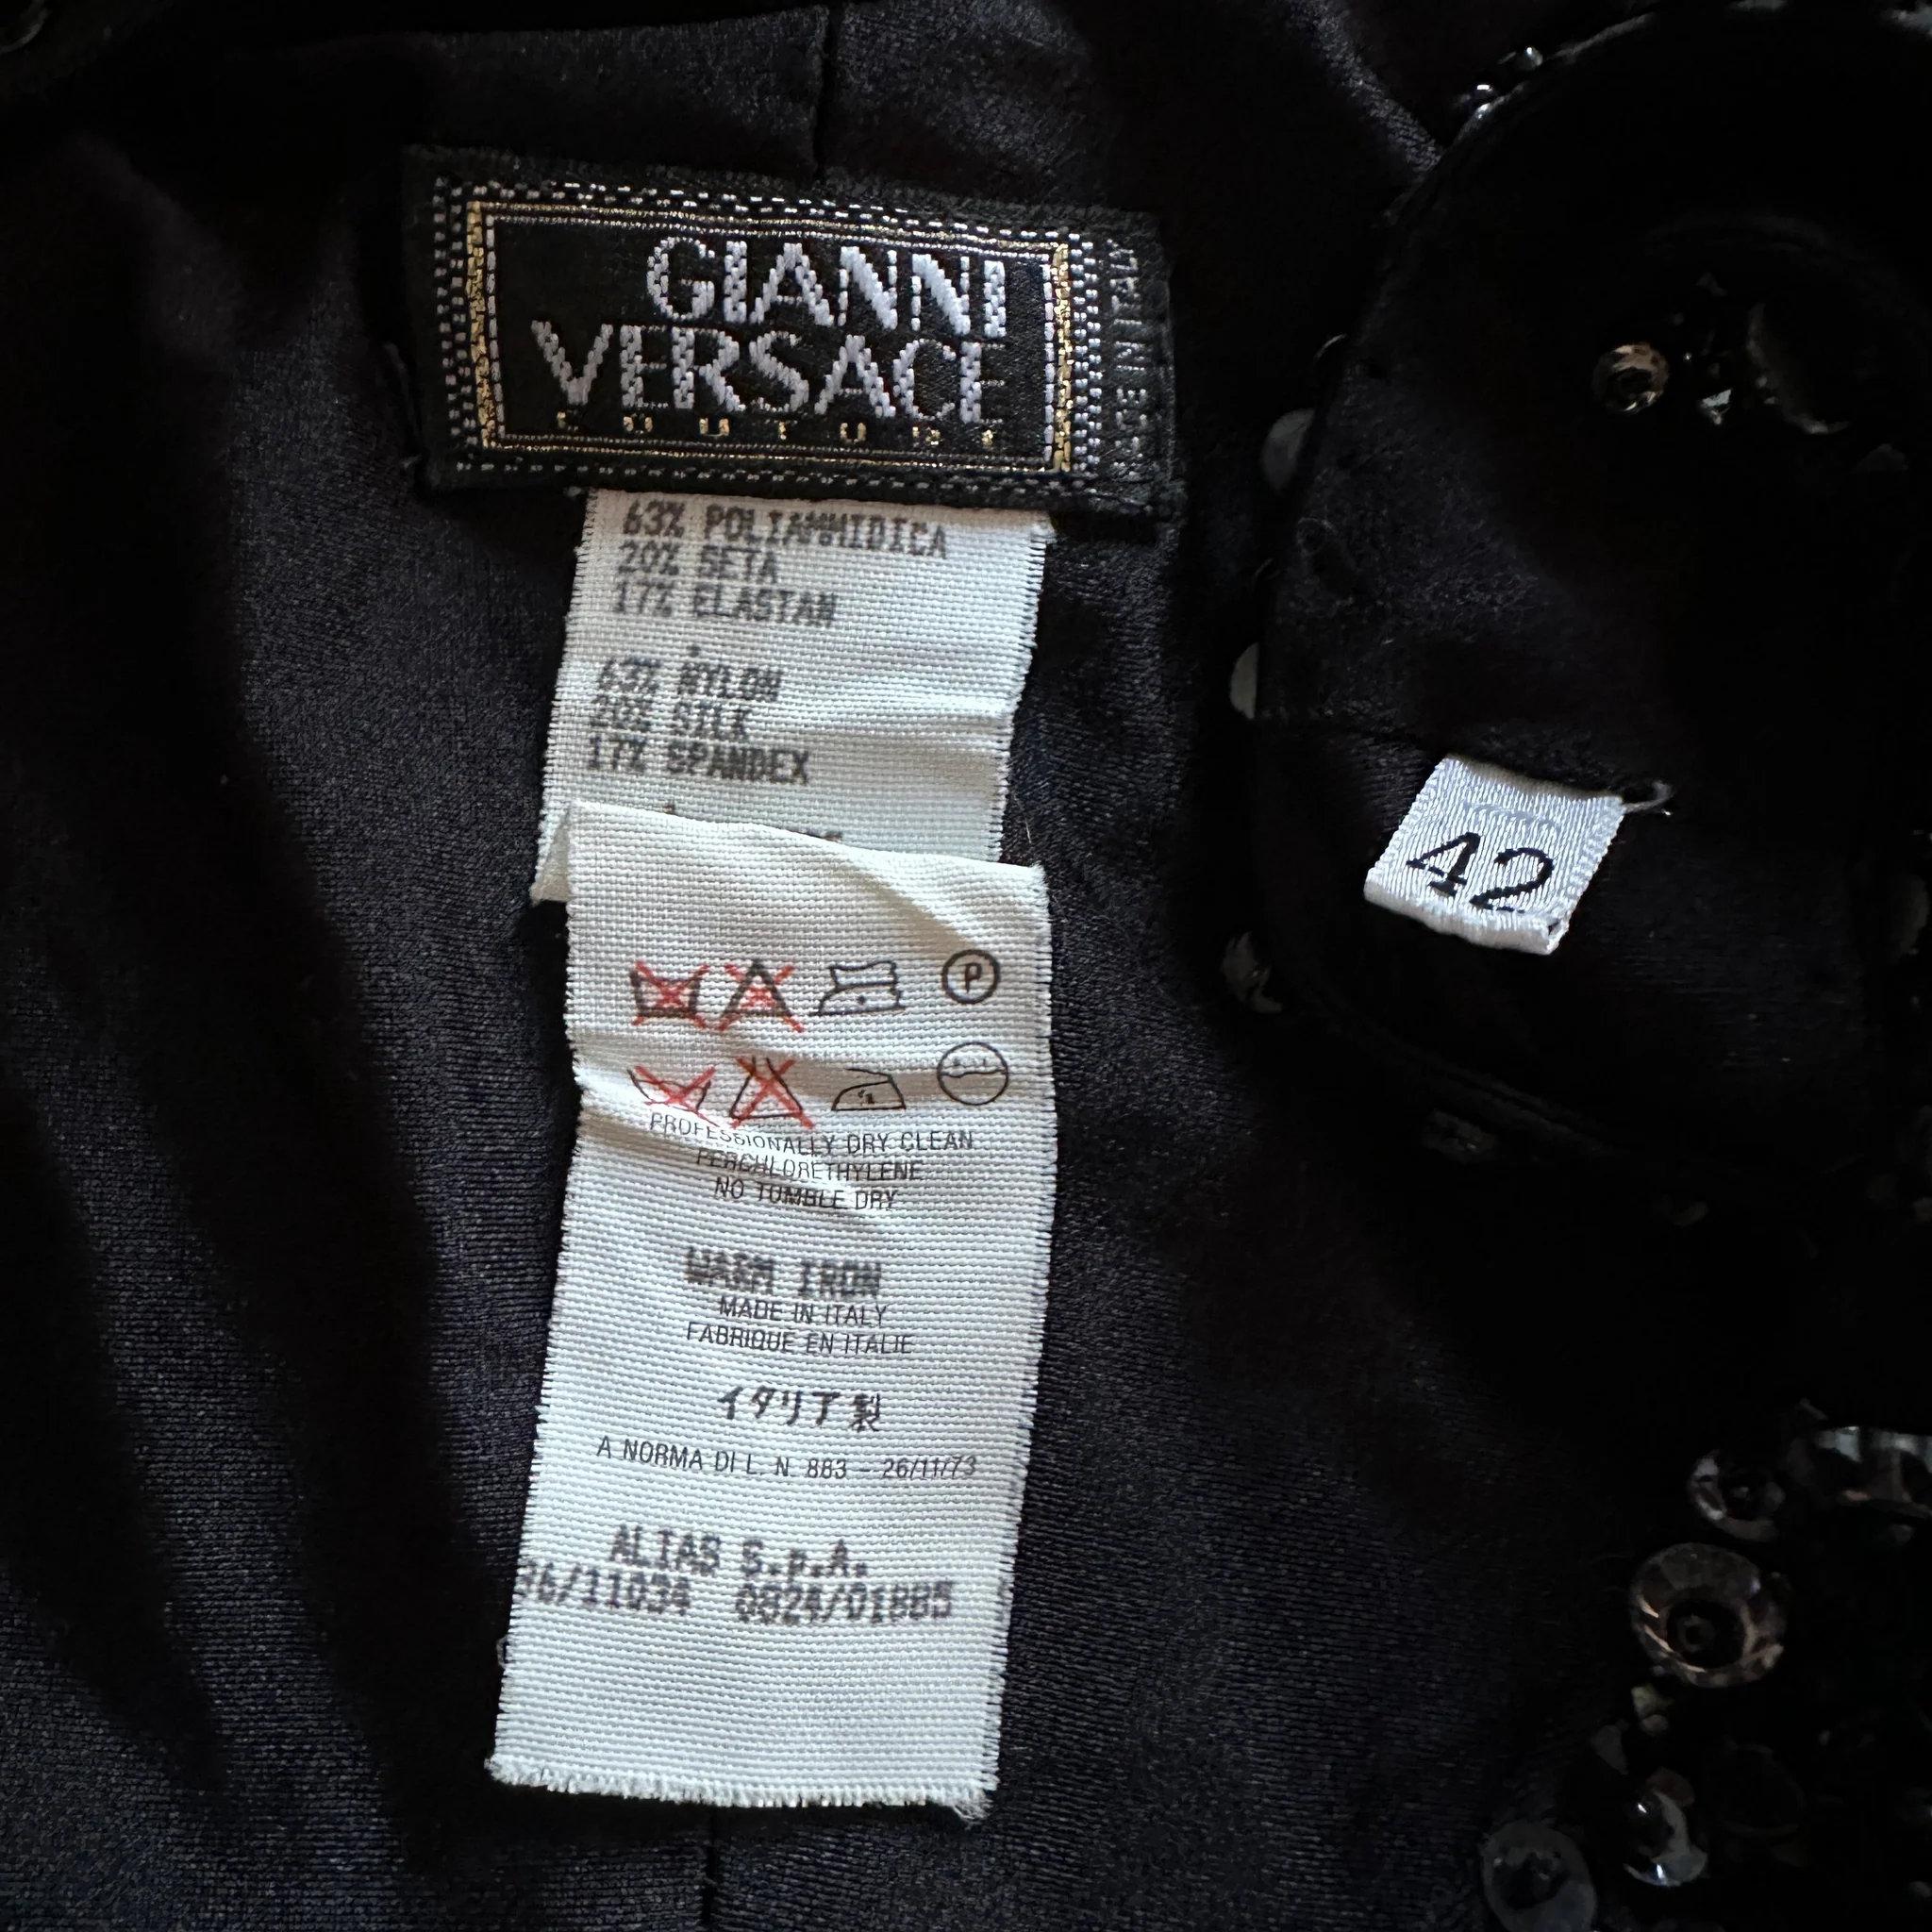 S/S '96 Gianni Versace Couture Embellished Runway Black Dress 4